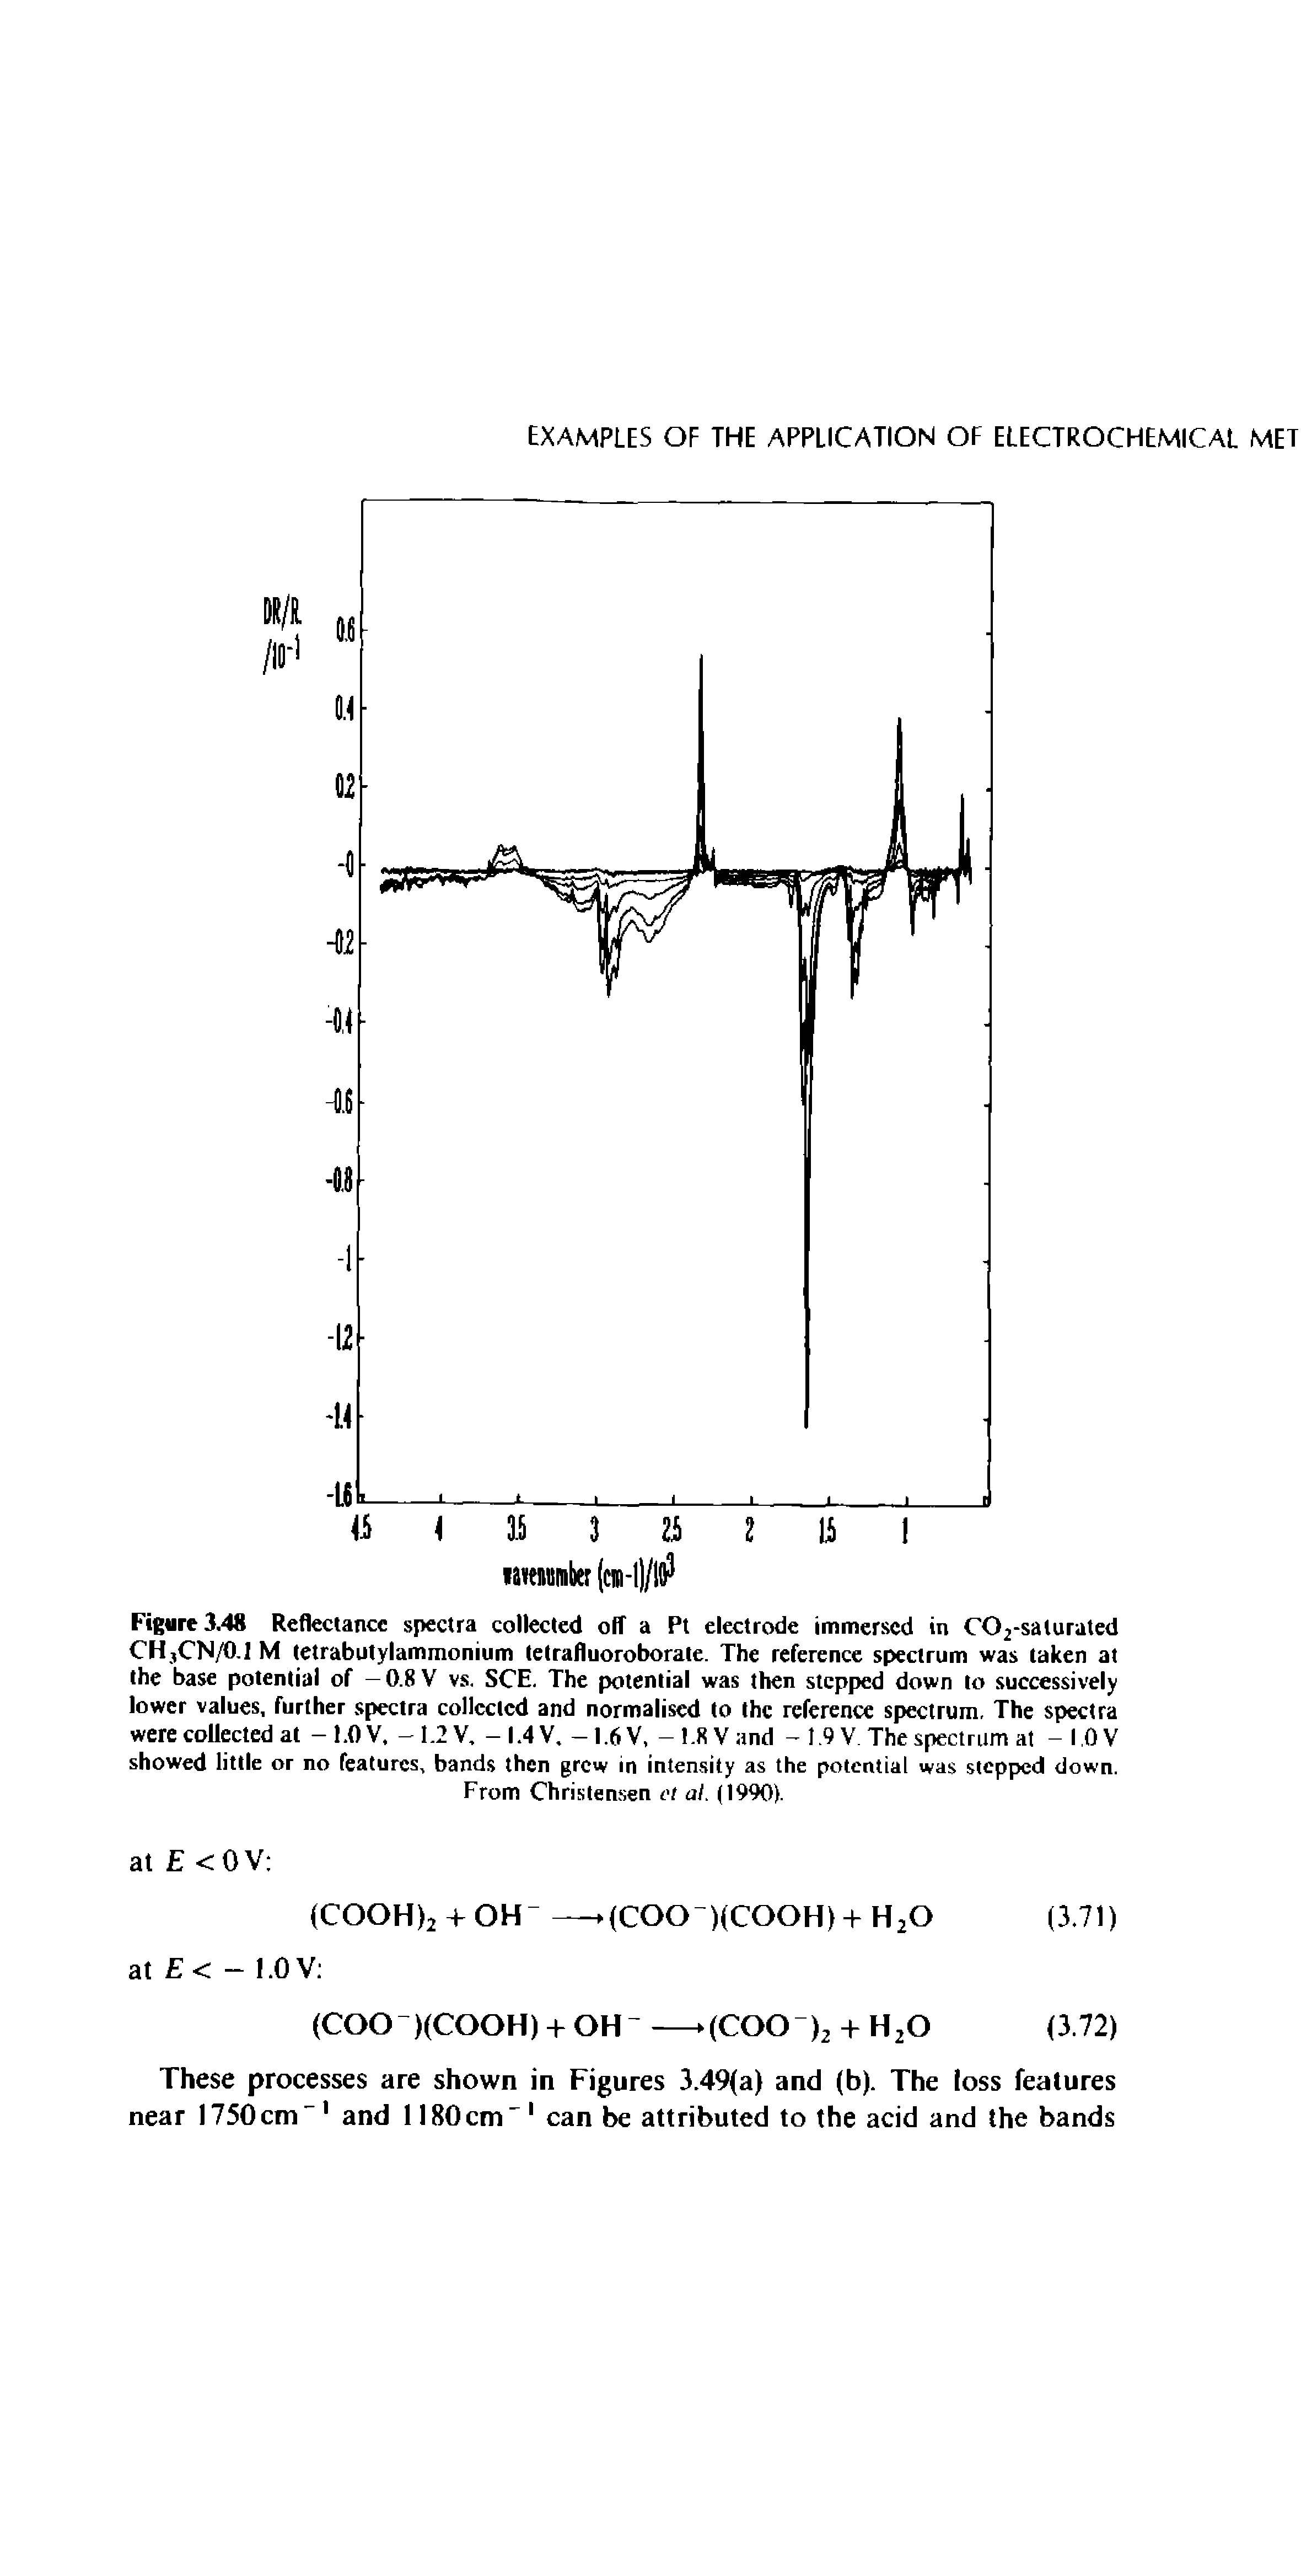 Figure 3.48 Reflectance spectra collected off a Pt electrode immersed in CO2-saturated CHjCN/0.1 M tetrabutylammonium tetrafluoroborate. The reference spectrum was taken at the base potential of — 0.8 V vs. SCE. The potential was then stepped down to successively lower values, further spectra collected and normalised to the reference spectrum. The spectra were collected at — 1.0 V, — 1.2 V, —1.4 V. —1.6 V, — 1.8 V and - 1.9 V. The spectrum at - 1.0 V showed little or no features, bands then grew in intensity as the potential was stepped down.